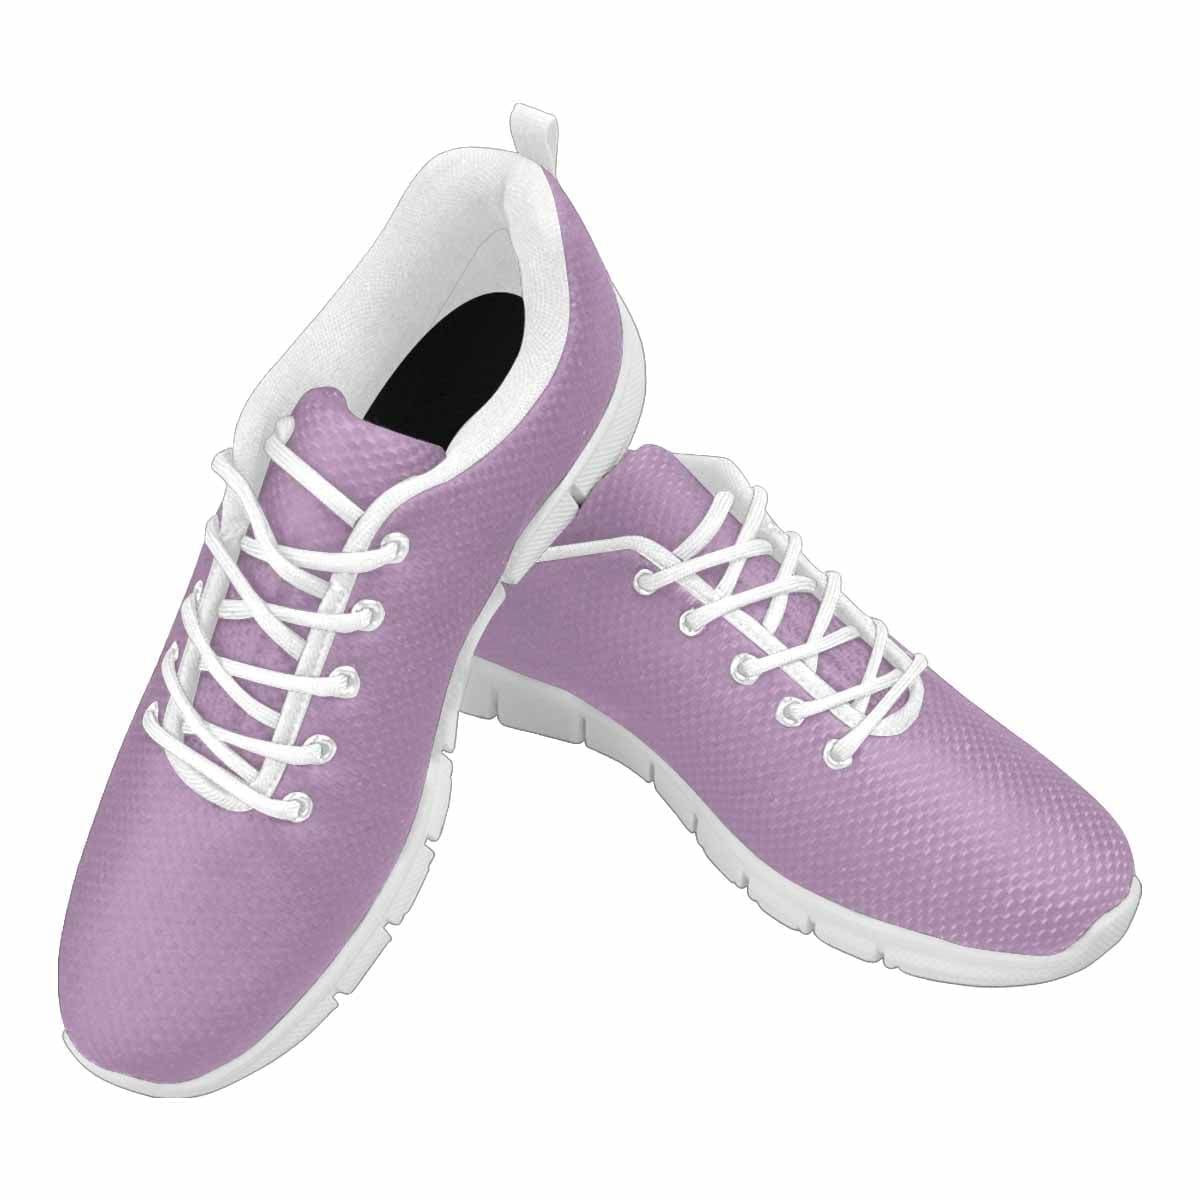 Sneakers For Men Lilac Purple - Canvas Mesh Athletic Running Shoes - Mens